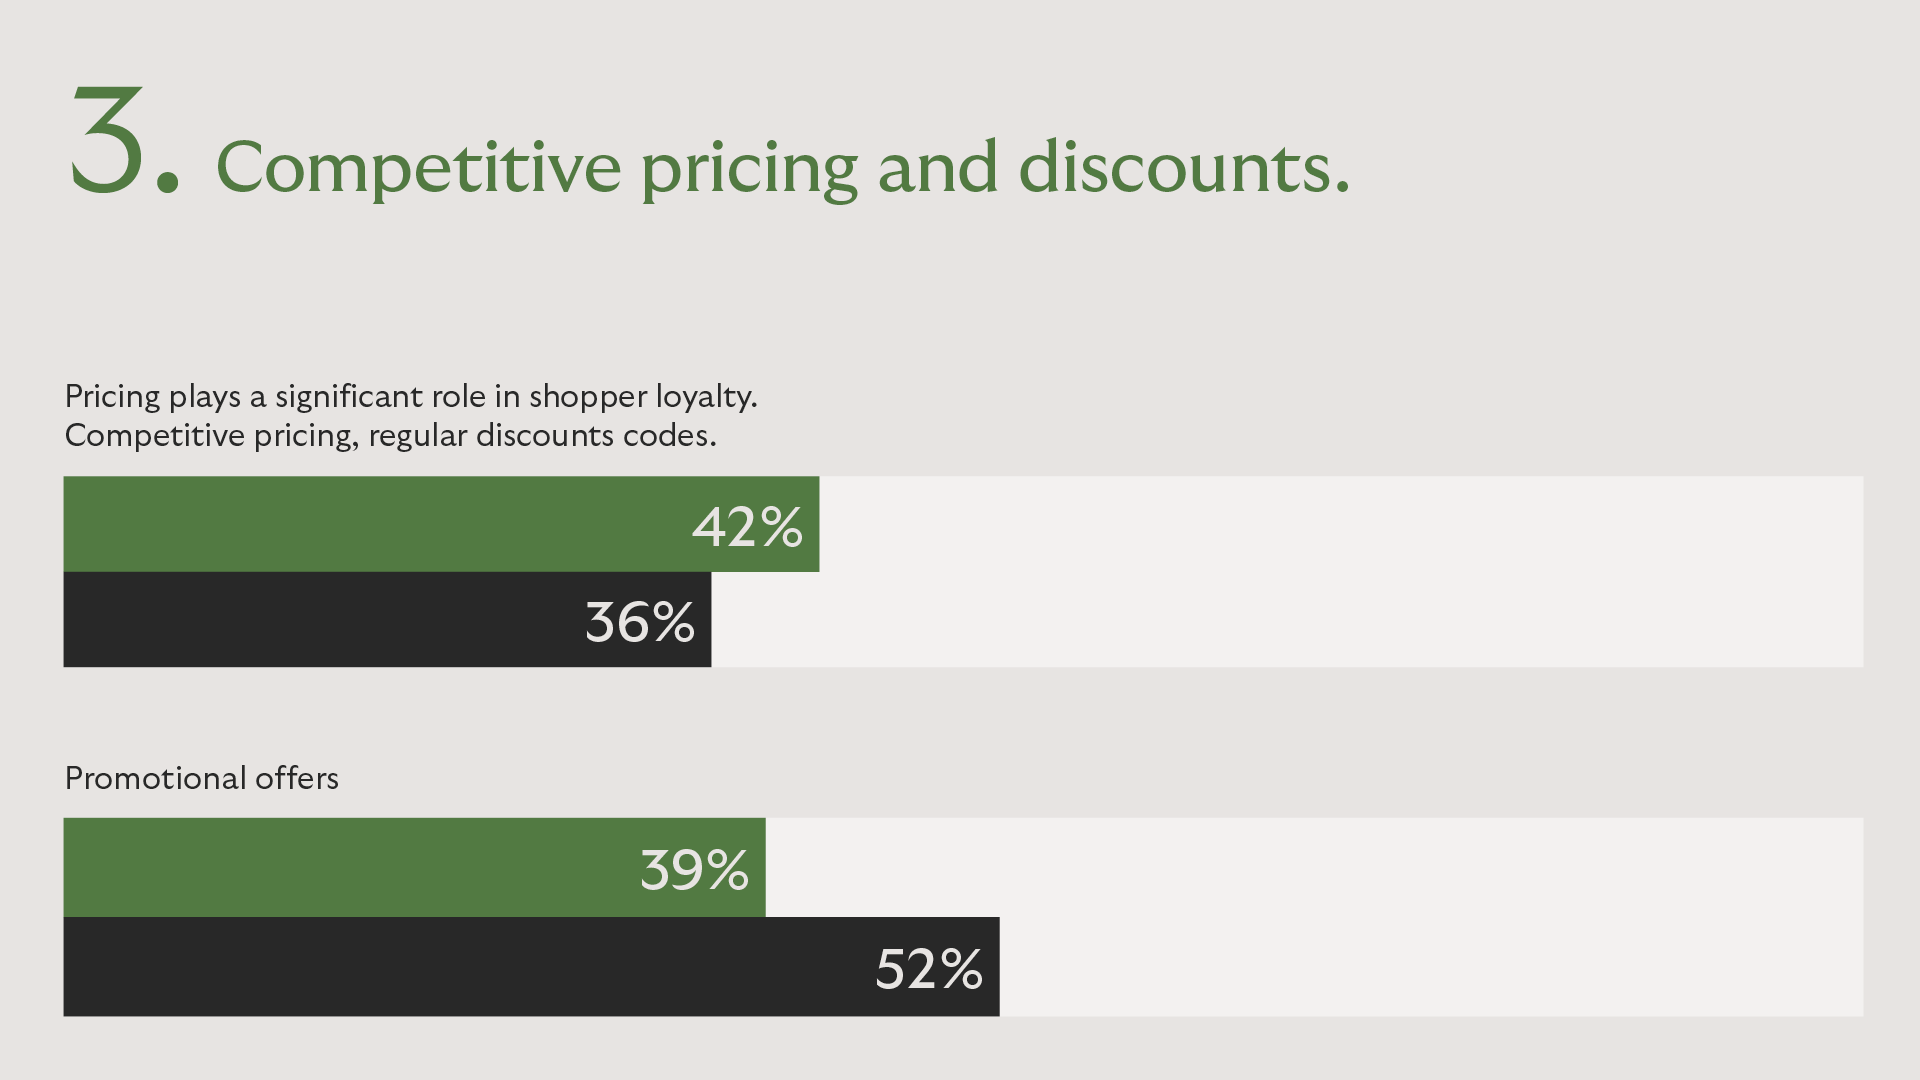 3. Competitive Pricing and Discounts loyalty